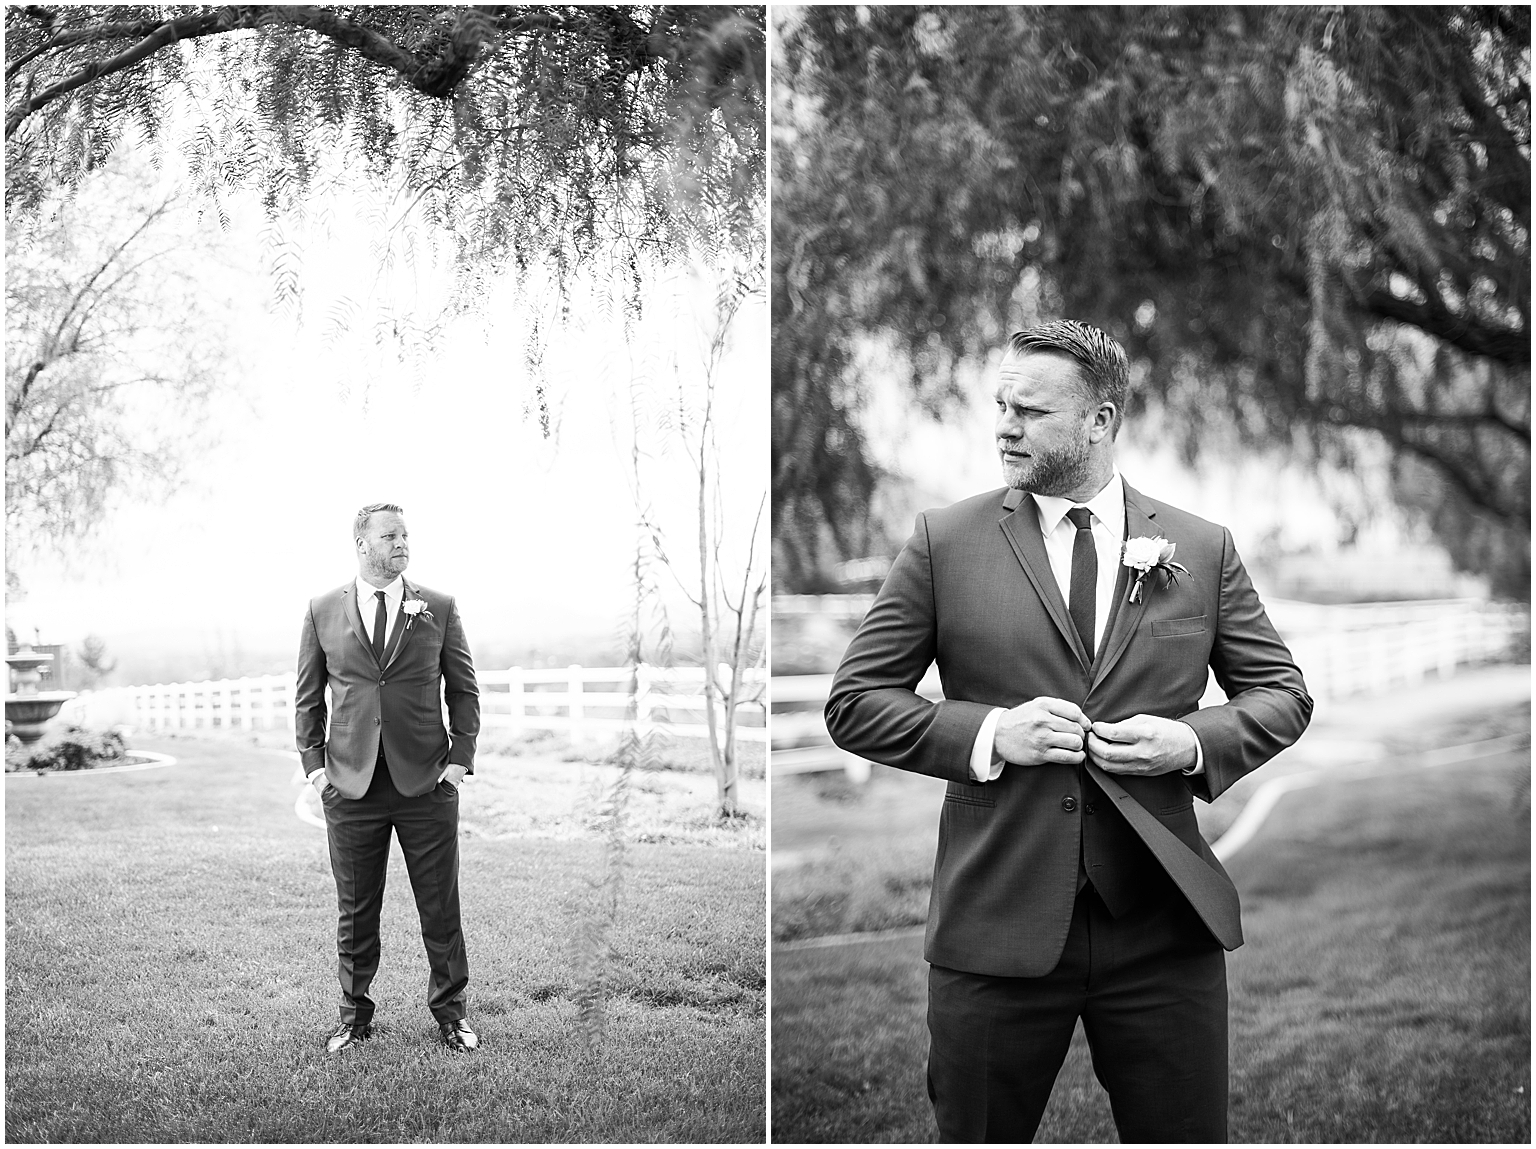 Black and white classic portrait of a groom waiting for his bride